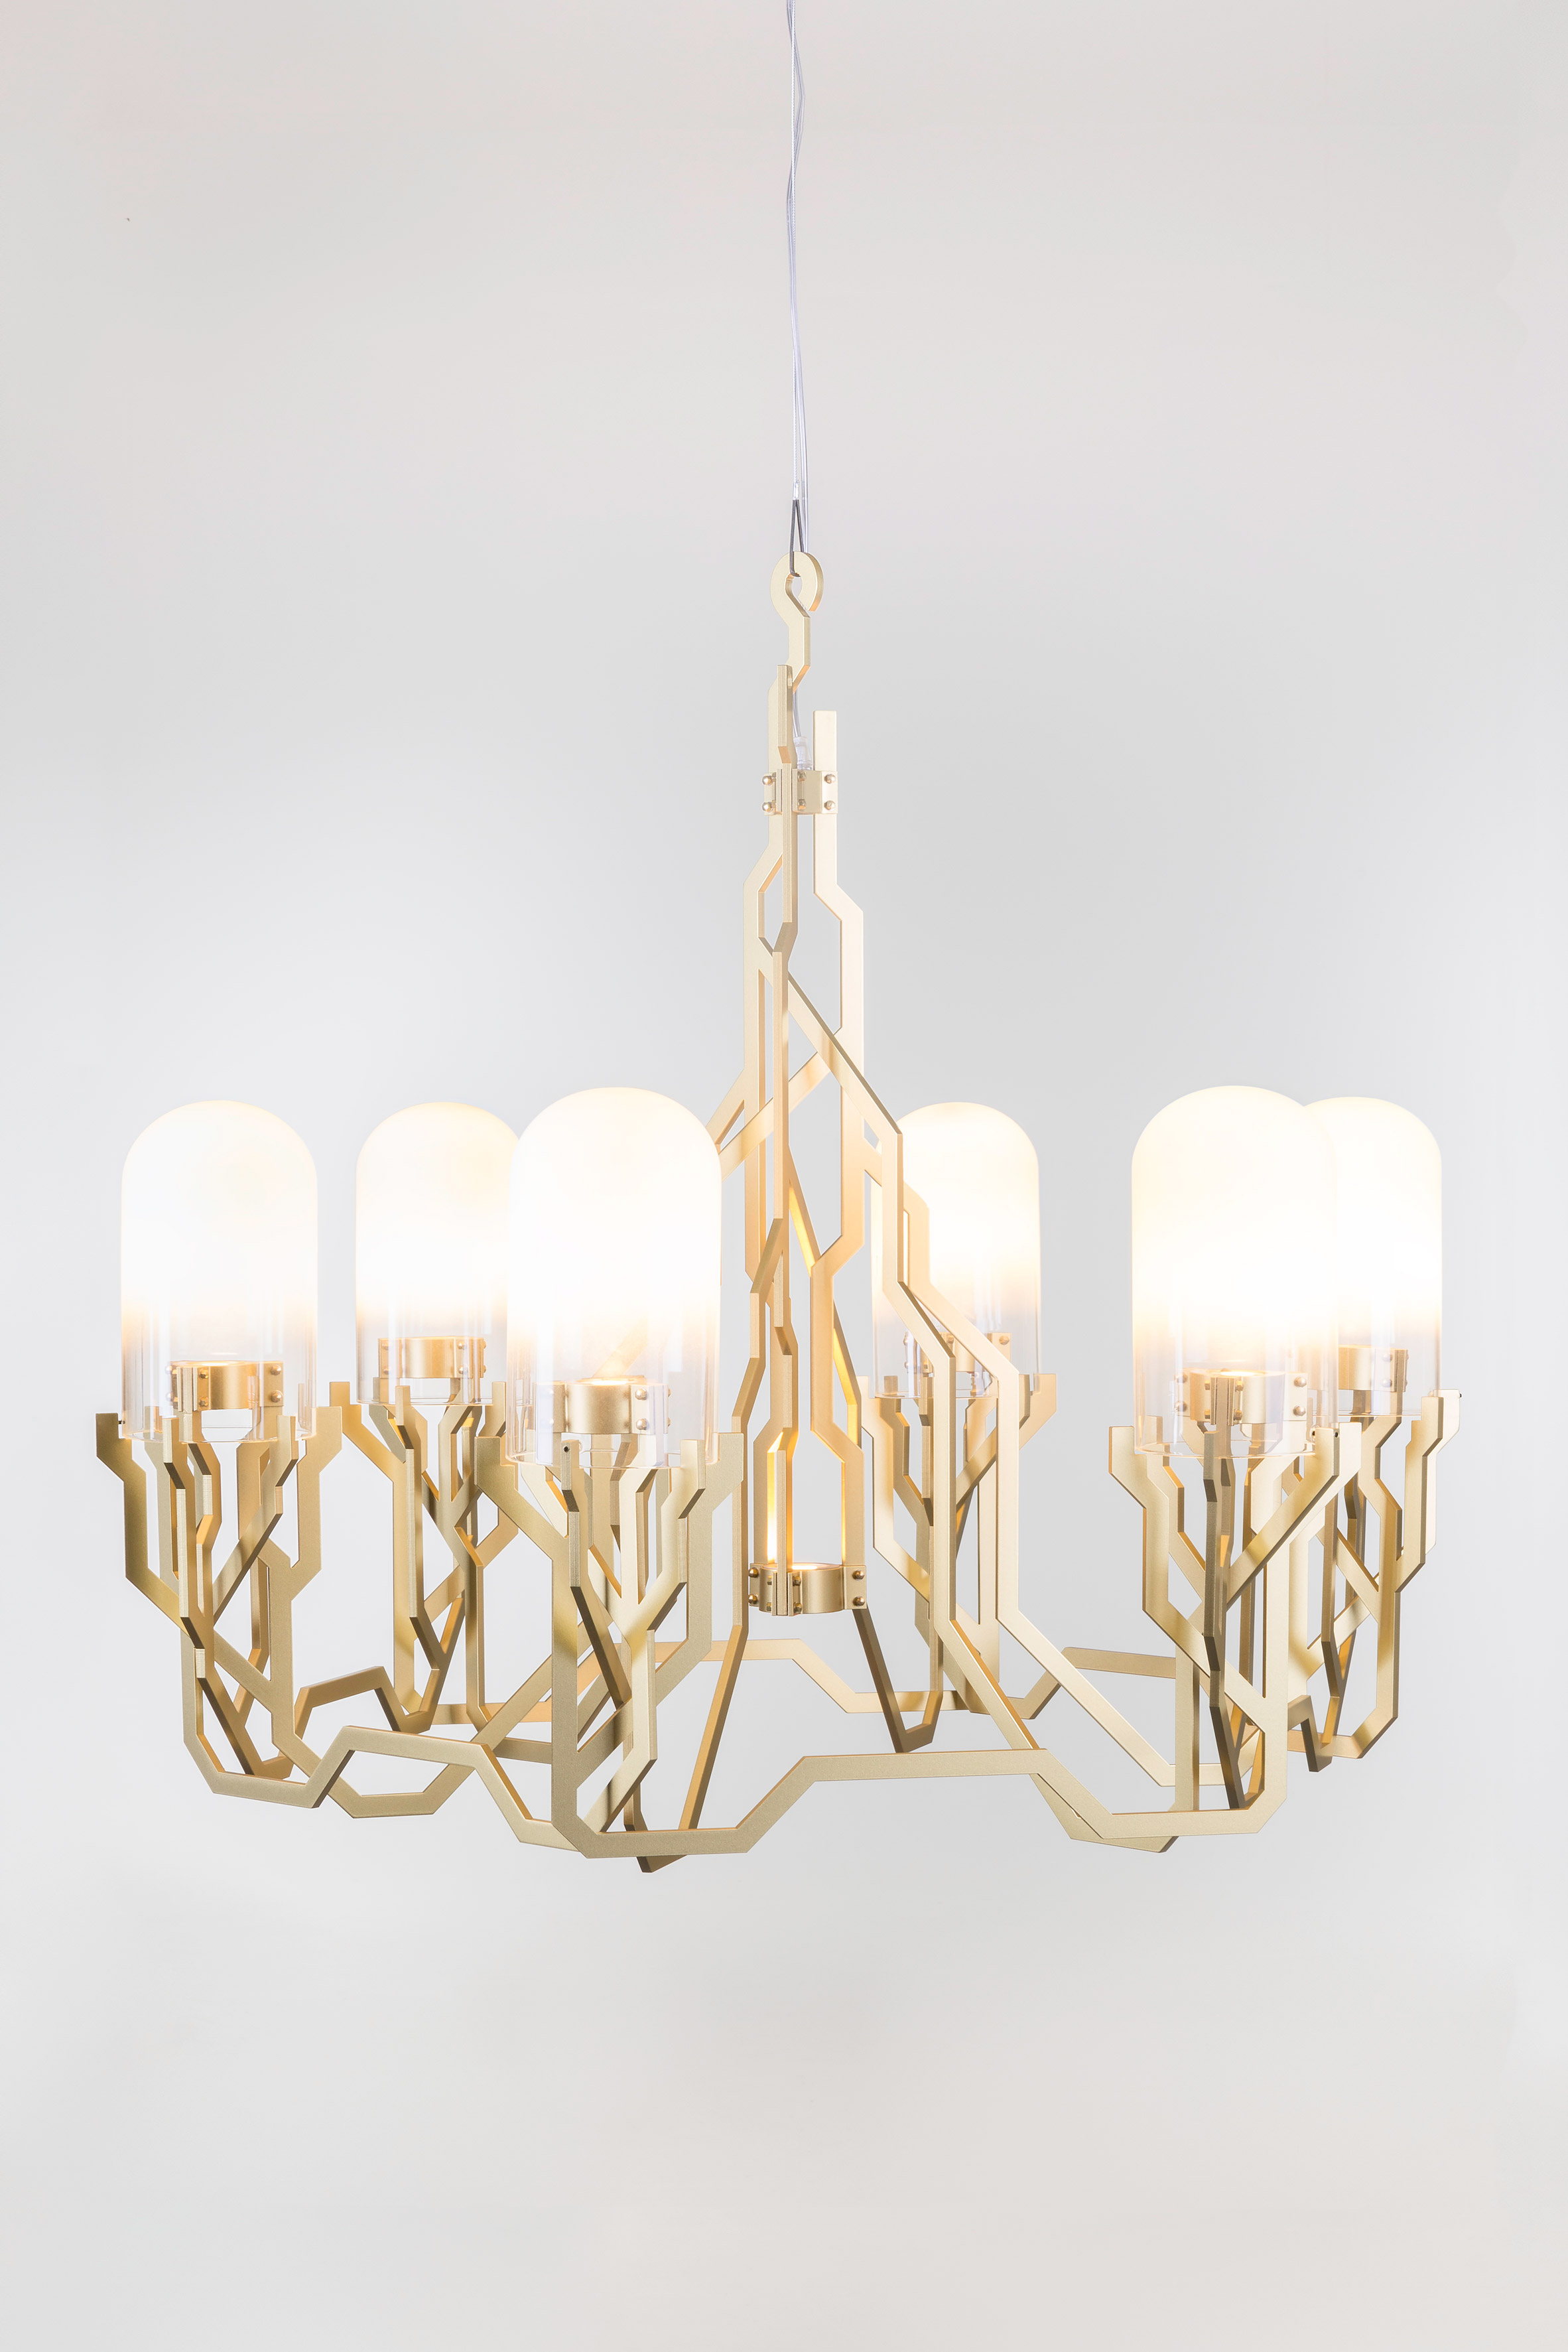 Plant Chandelier by Kranen/Gille for Moooi